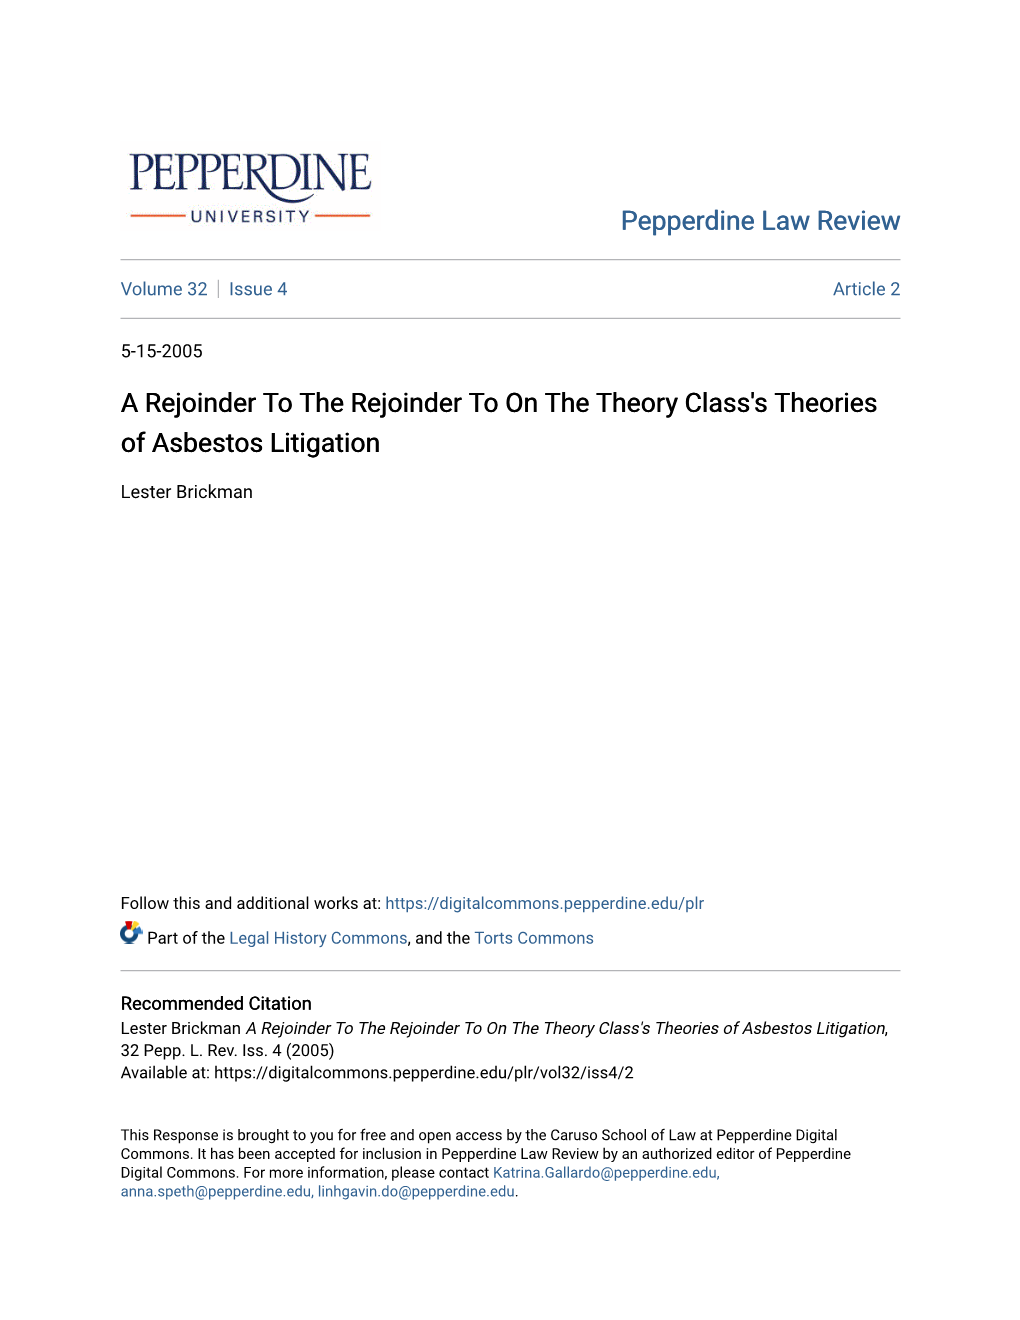 A Rejoinder to the Rejoinder to on the Theory Class's Theories of Asbestos Litigation